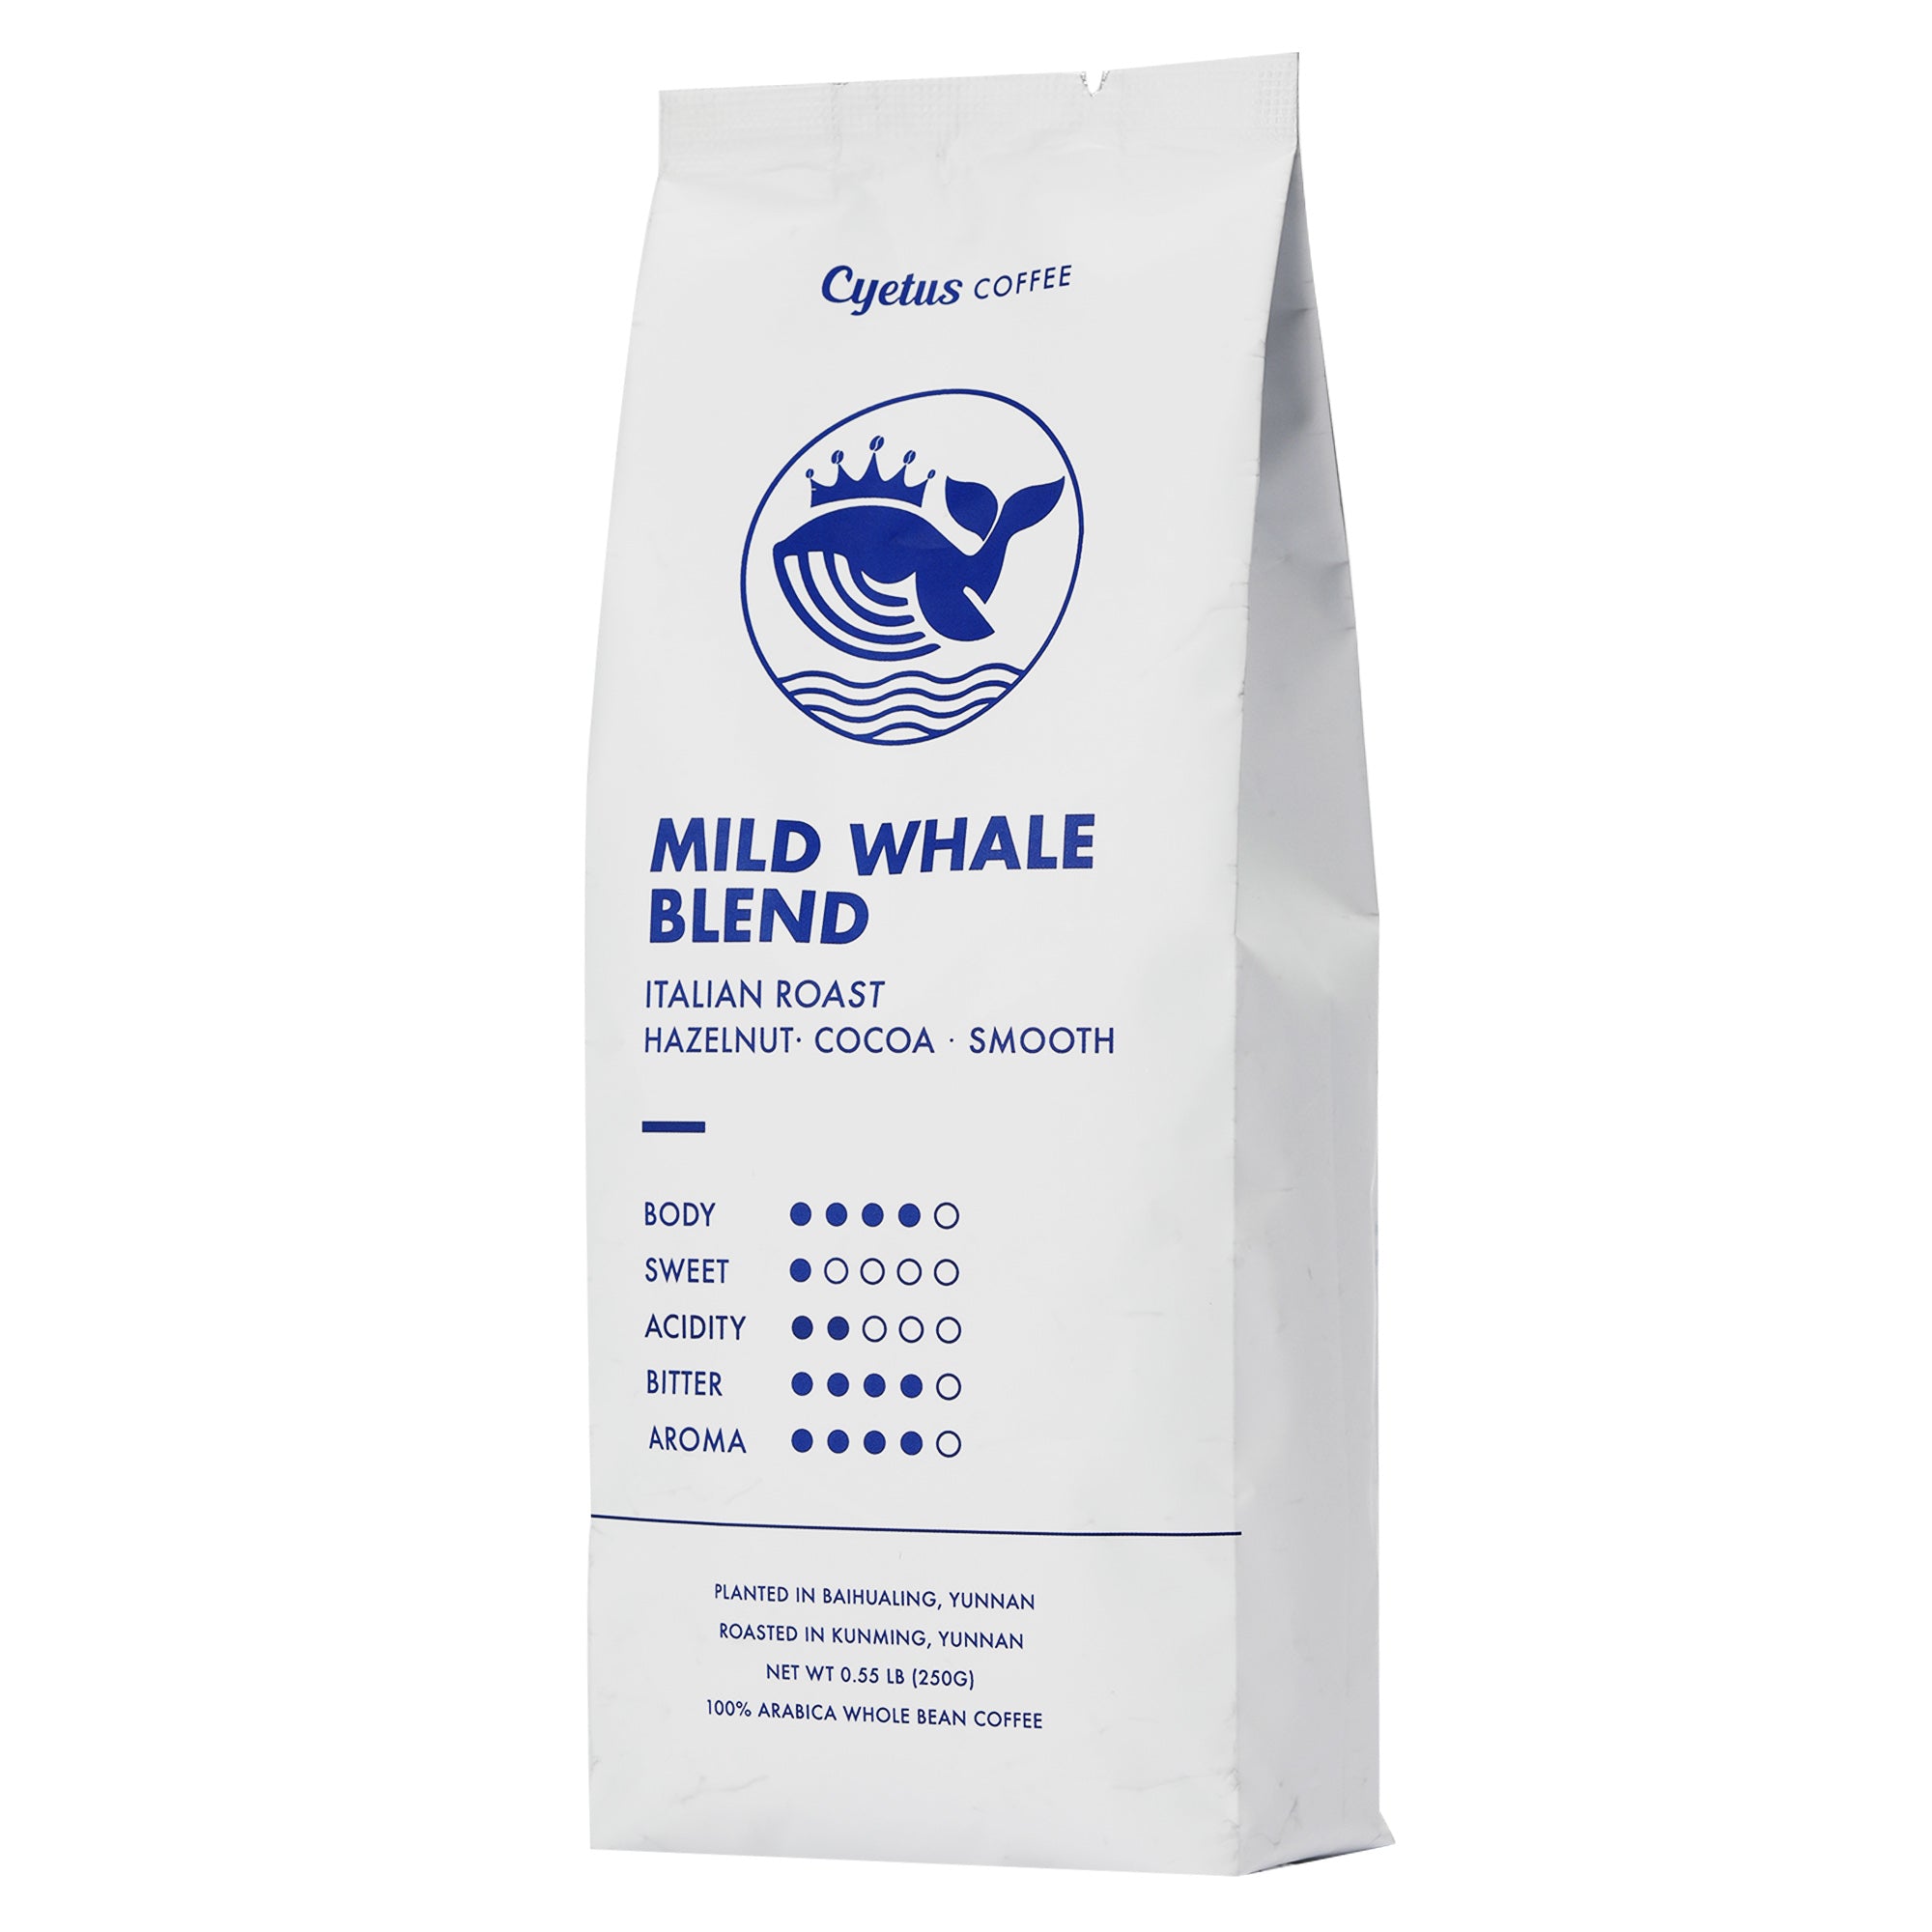 Mighty Whale Blend Coffee Beans,100% Arabica,Two Packs